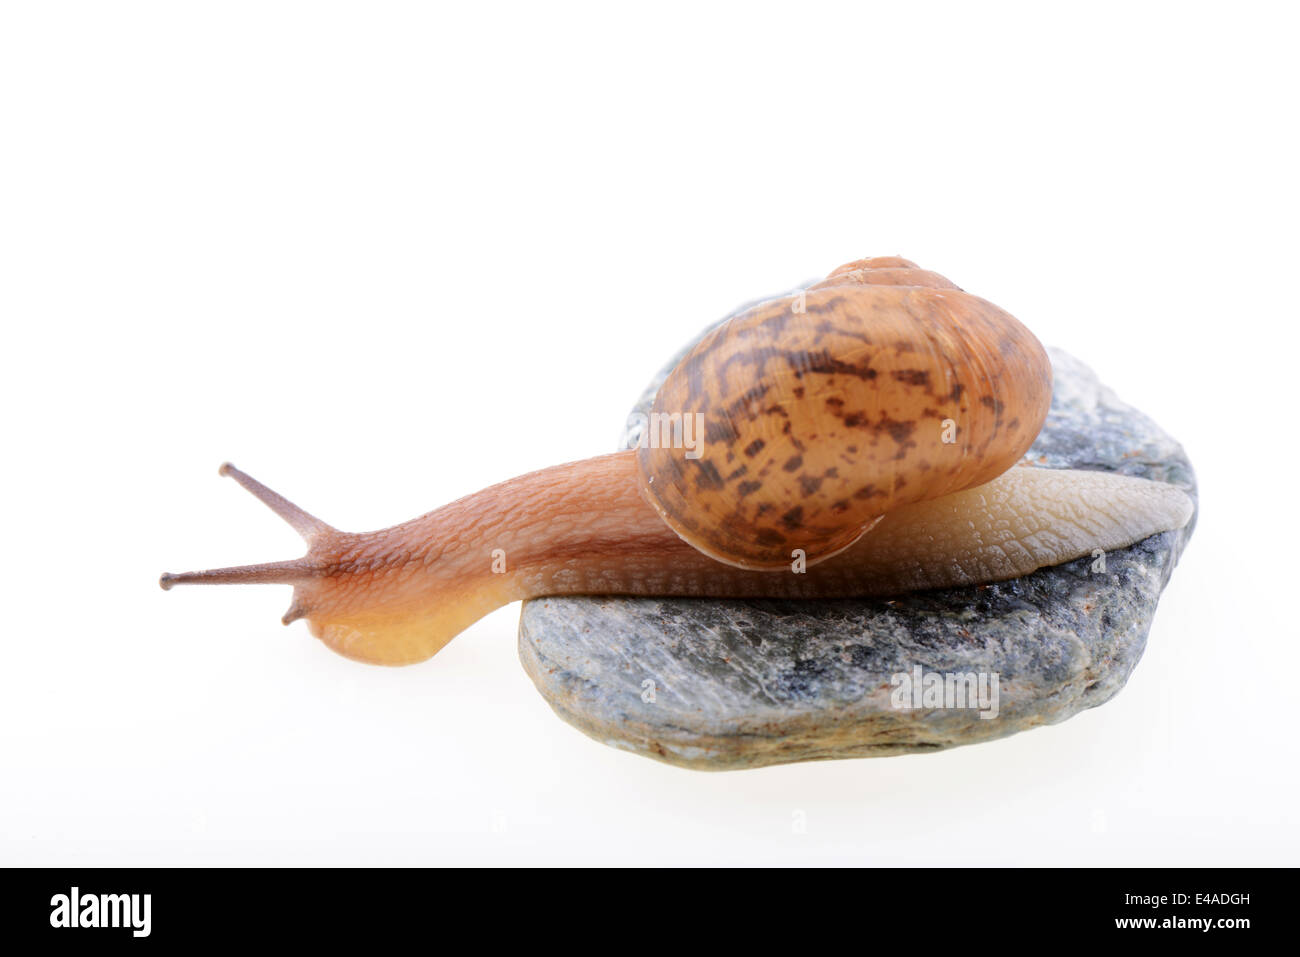 A snail crawls on a stone isolated on a white background Stock Photo